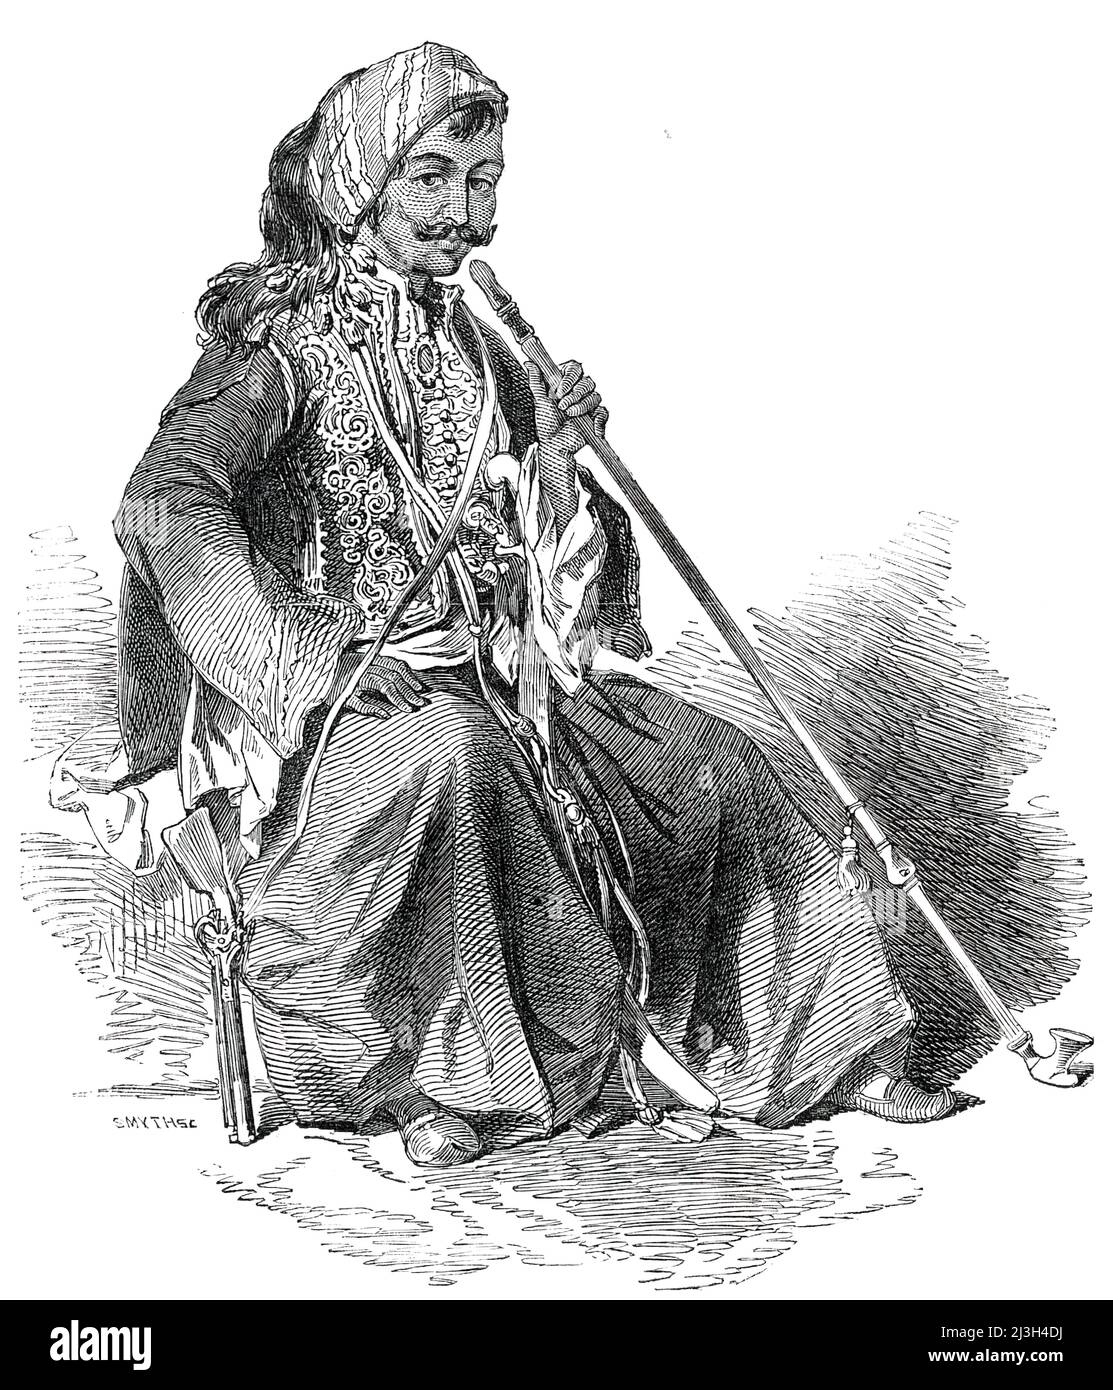 Emir Khanjar, the Prince of Baalbeck, Leader of the Insurrection of Damascus, 1850. Portrait of Khanjar bin Melhem Al-Harfouche: ''the present Emir...is one of the most daring soldiers and distinguished jereed players in any part of Asia. He on frequent occasions put the Turkish troops at defiance with a small troop of his own horsemen; and, when closely pressed, betook himself to his mountain fastnesses north of Baalbeck, and about the Lebanon north of the &quot;cedars&quot; of Lebanon. He on other occasions offered his services to the authorities at Damascus...The present Government in Syria Stock Photo